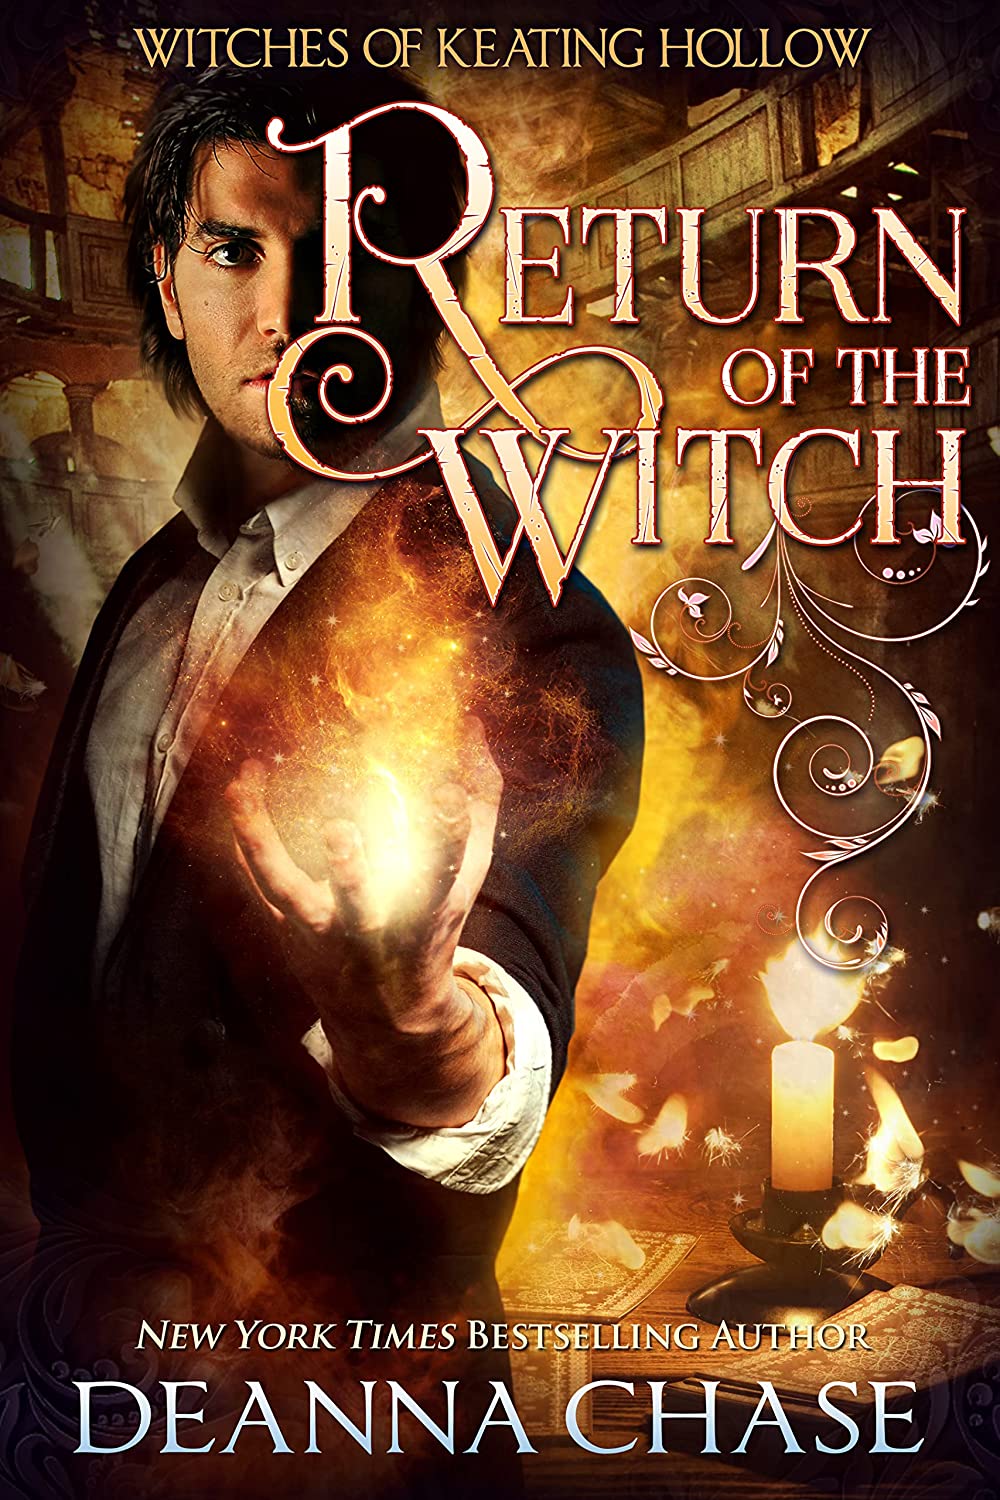 Return of the Witch by Deanna Chase